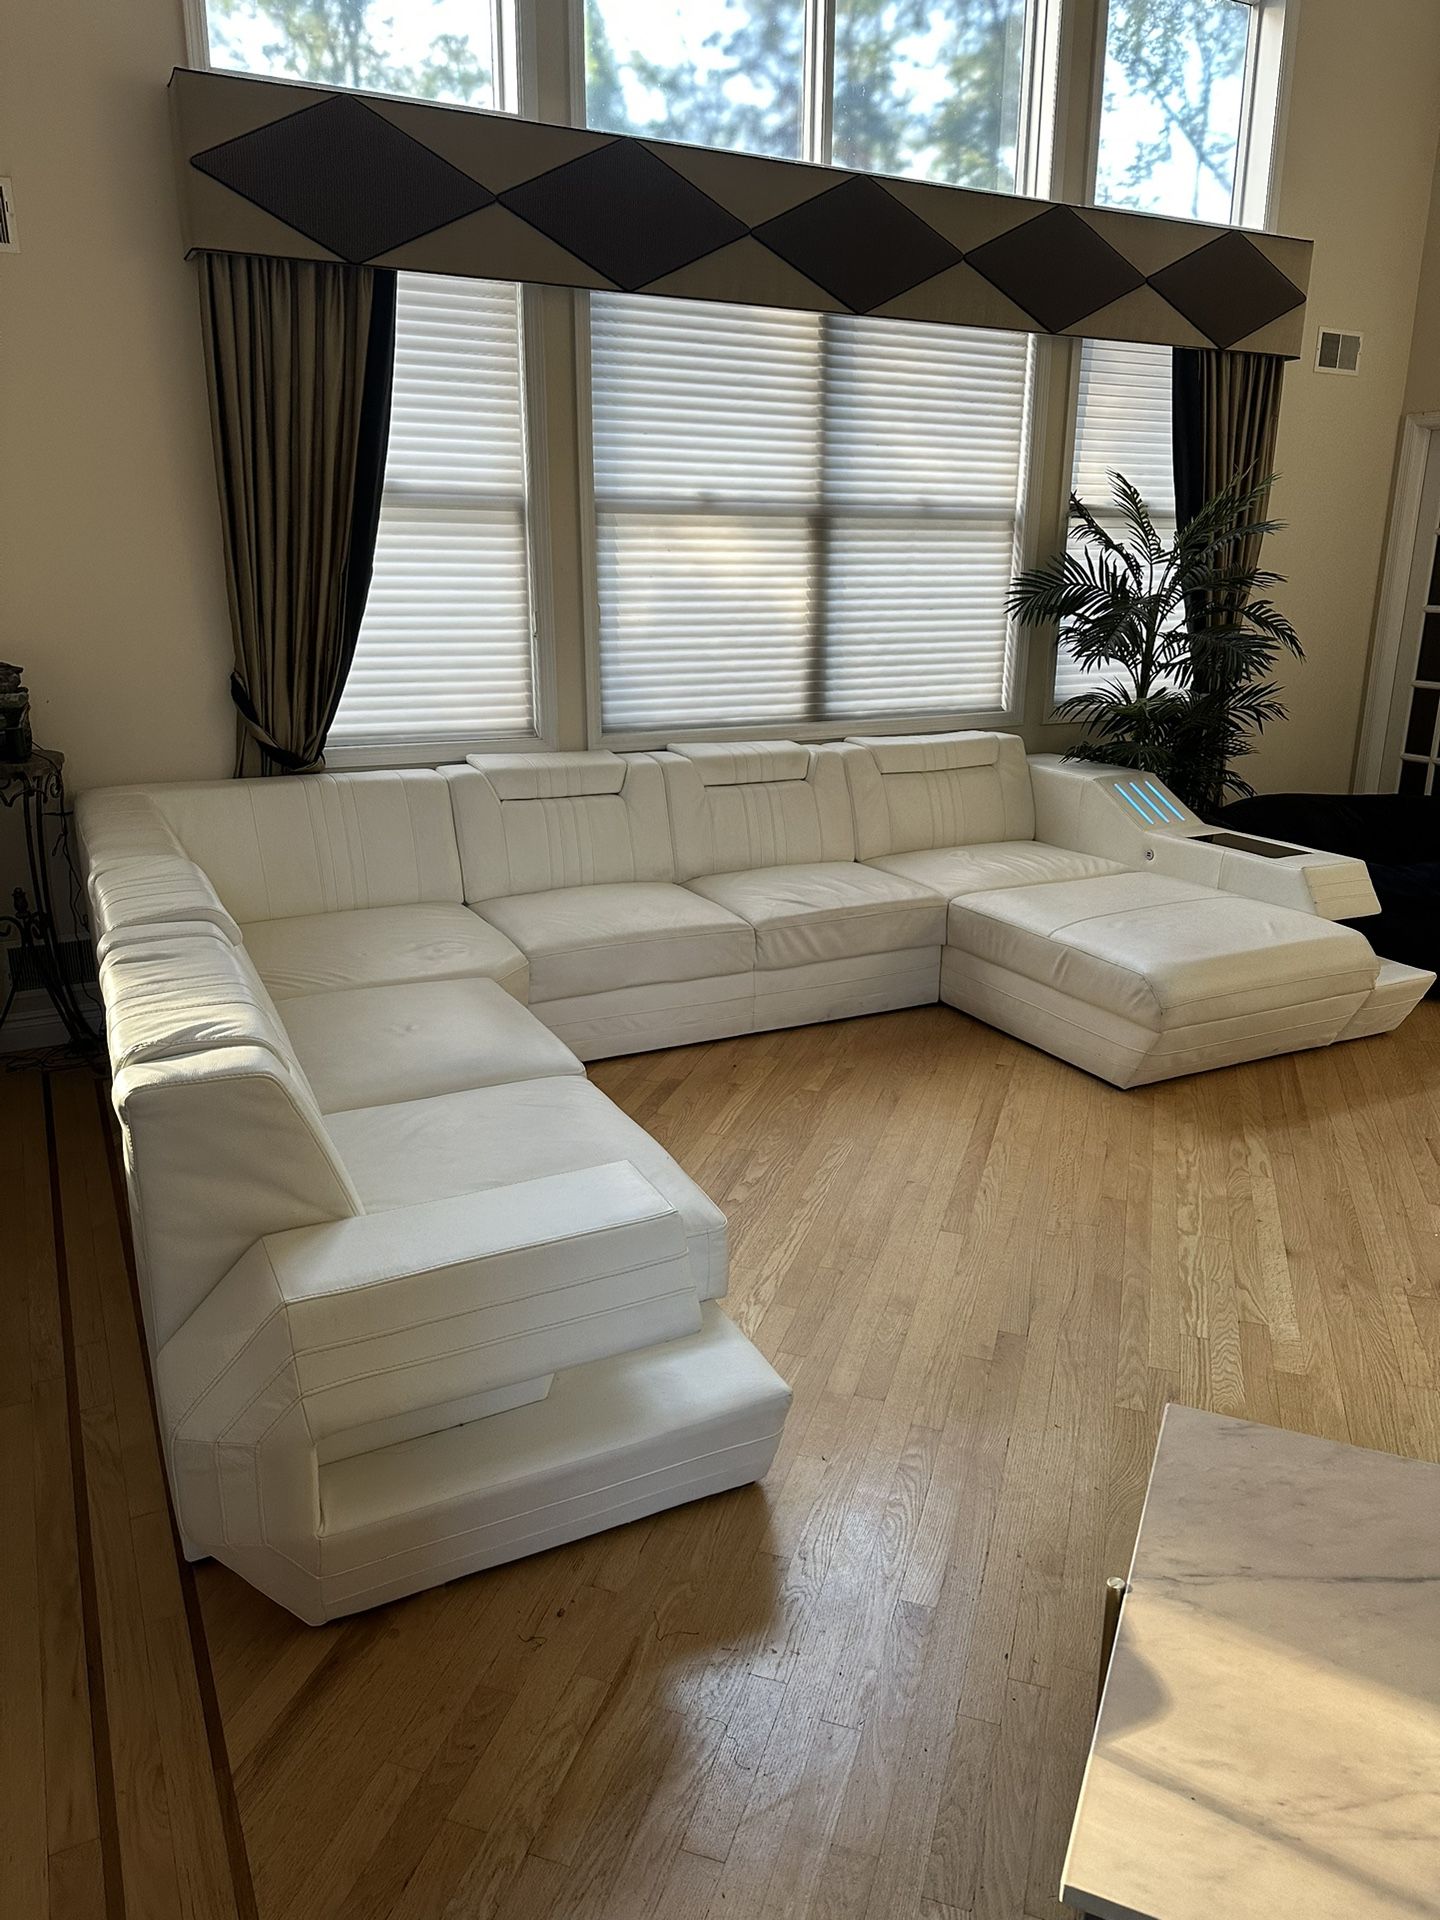 White Sectional Couch And Table